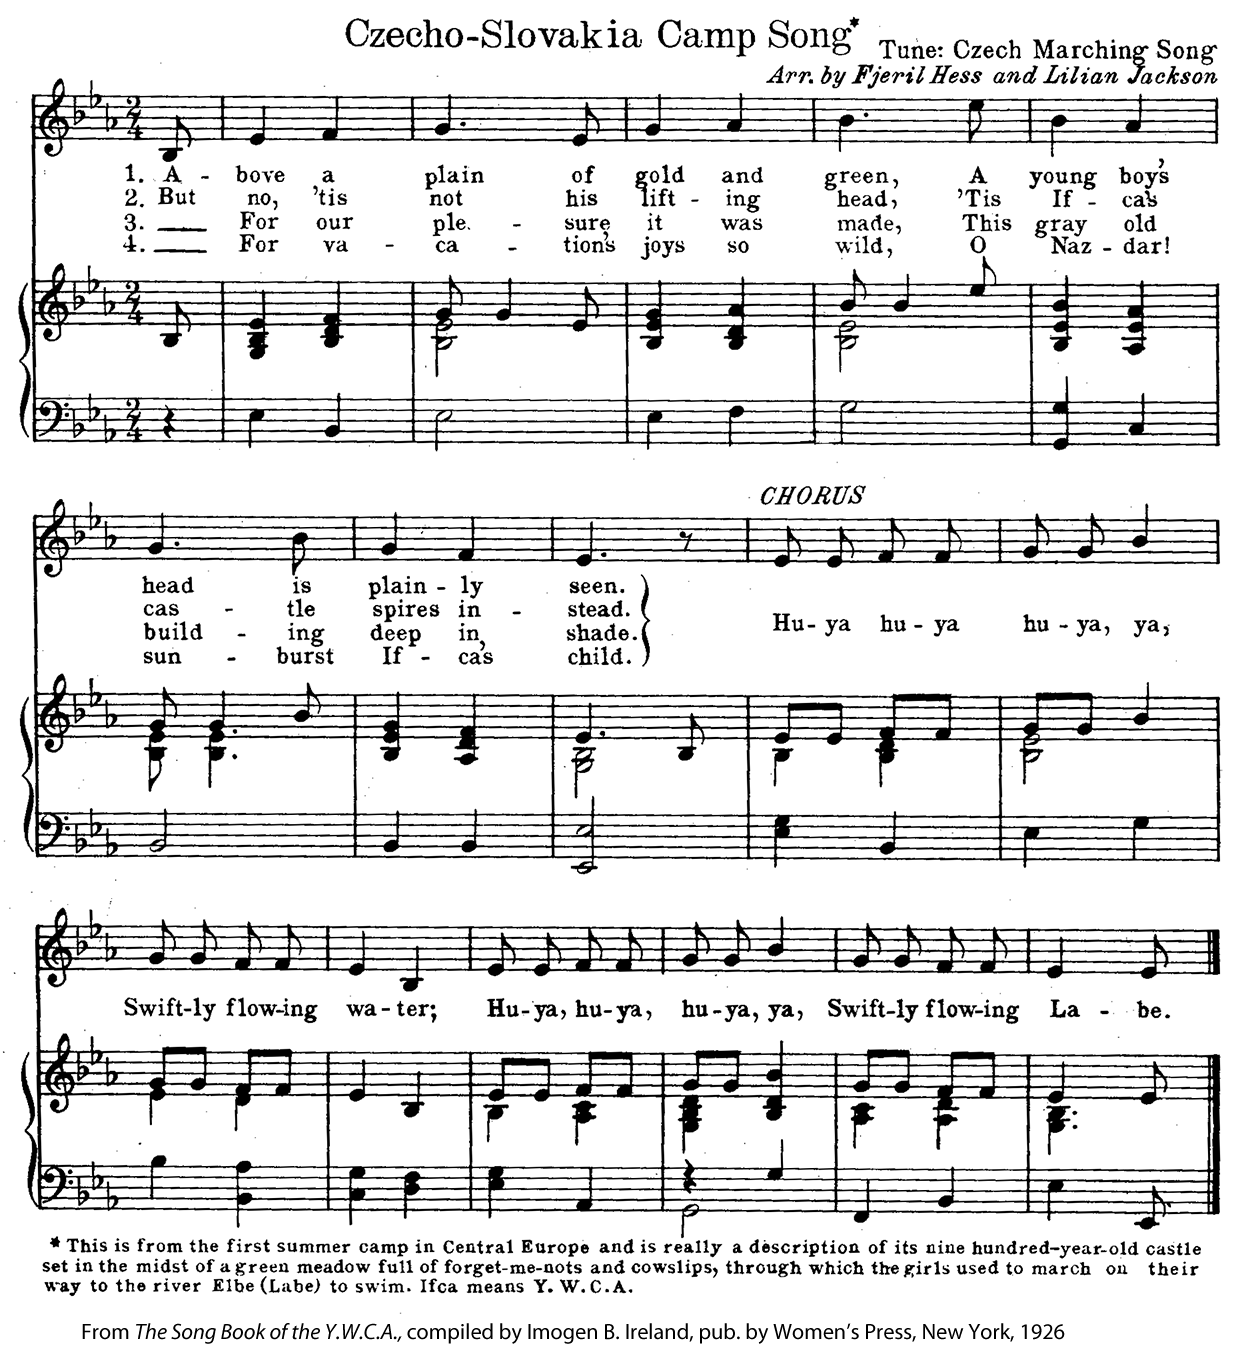 Czechoslovia Camp Song from The Song Book of The Y.W.C.A., 1926